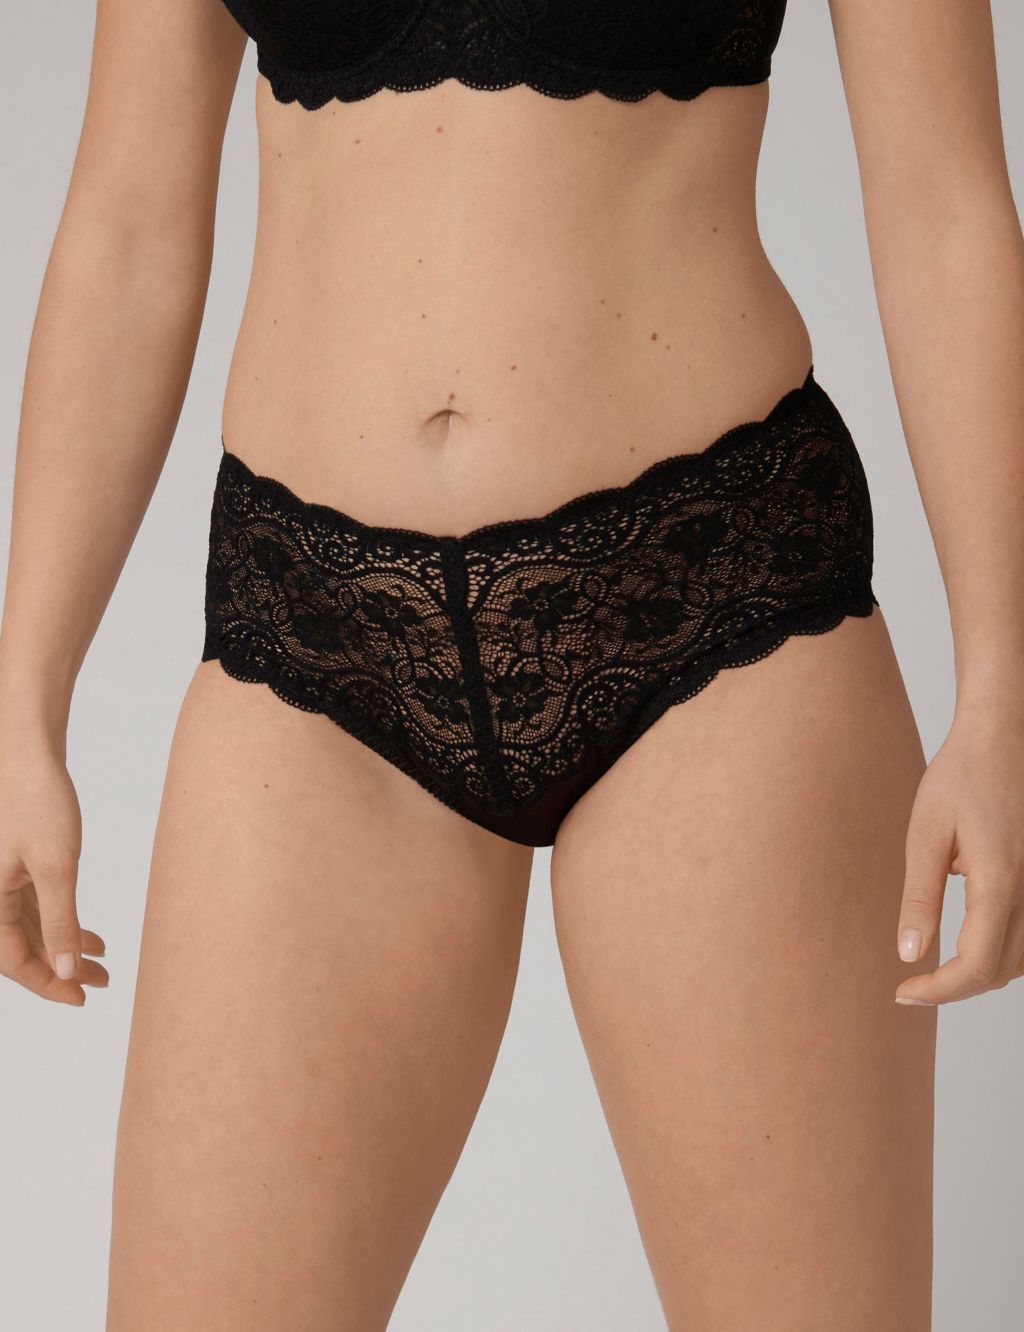 Amourette 300 All Over Lace Full Briefs image 1